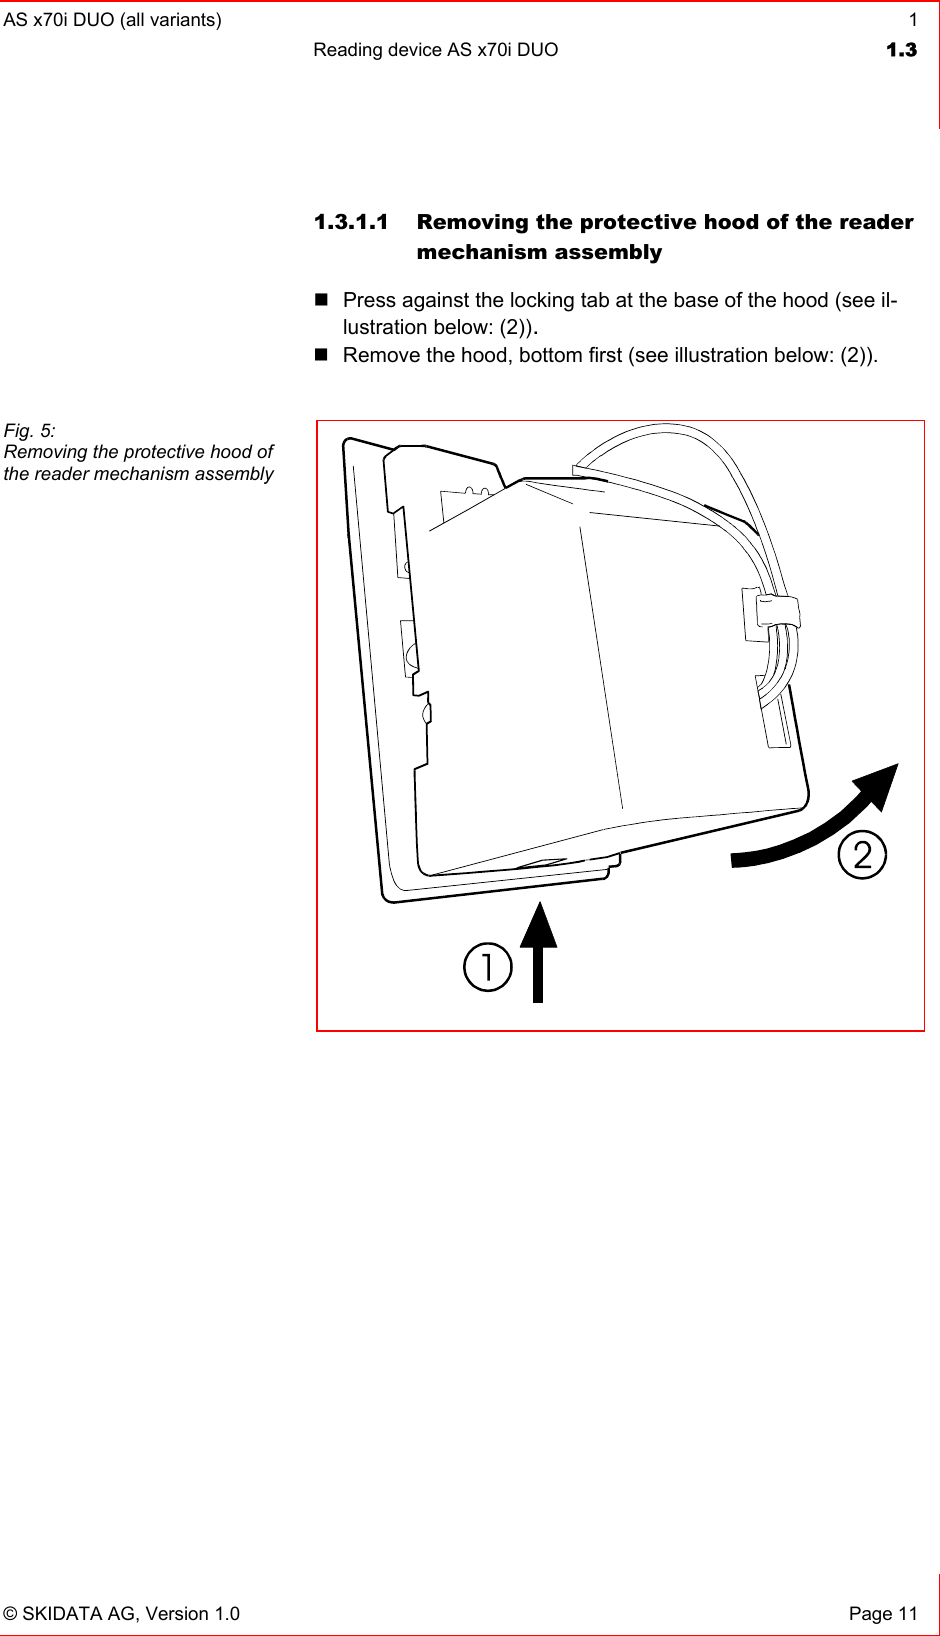 AS x70i DUO (all variants)  1 Reading device AS x70i DUO  1.3   © SKIDATA AG, Version 1.0  Page 11 1.3.1.1  Removing the protective hood of the reader mechanism assembly   Press against the locking tab at the base of the hood (see il-lustration below: (2)).  Remove the hood, bottom first (see illustration below: (2)).    Fig. 5: Removing the protective hood of the reader mechanism assembly  